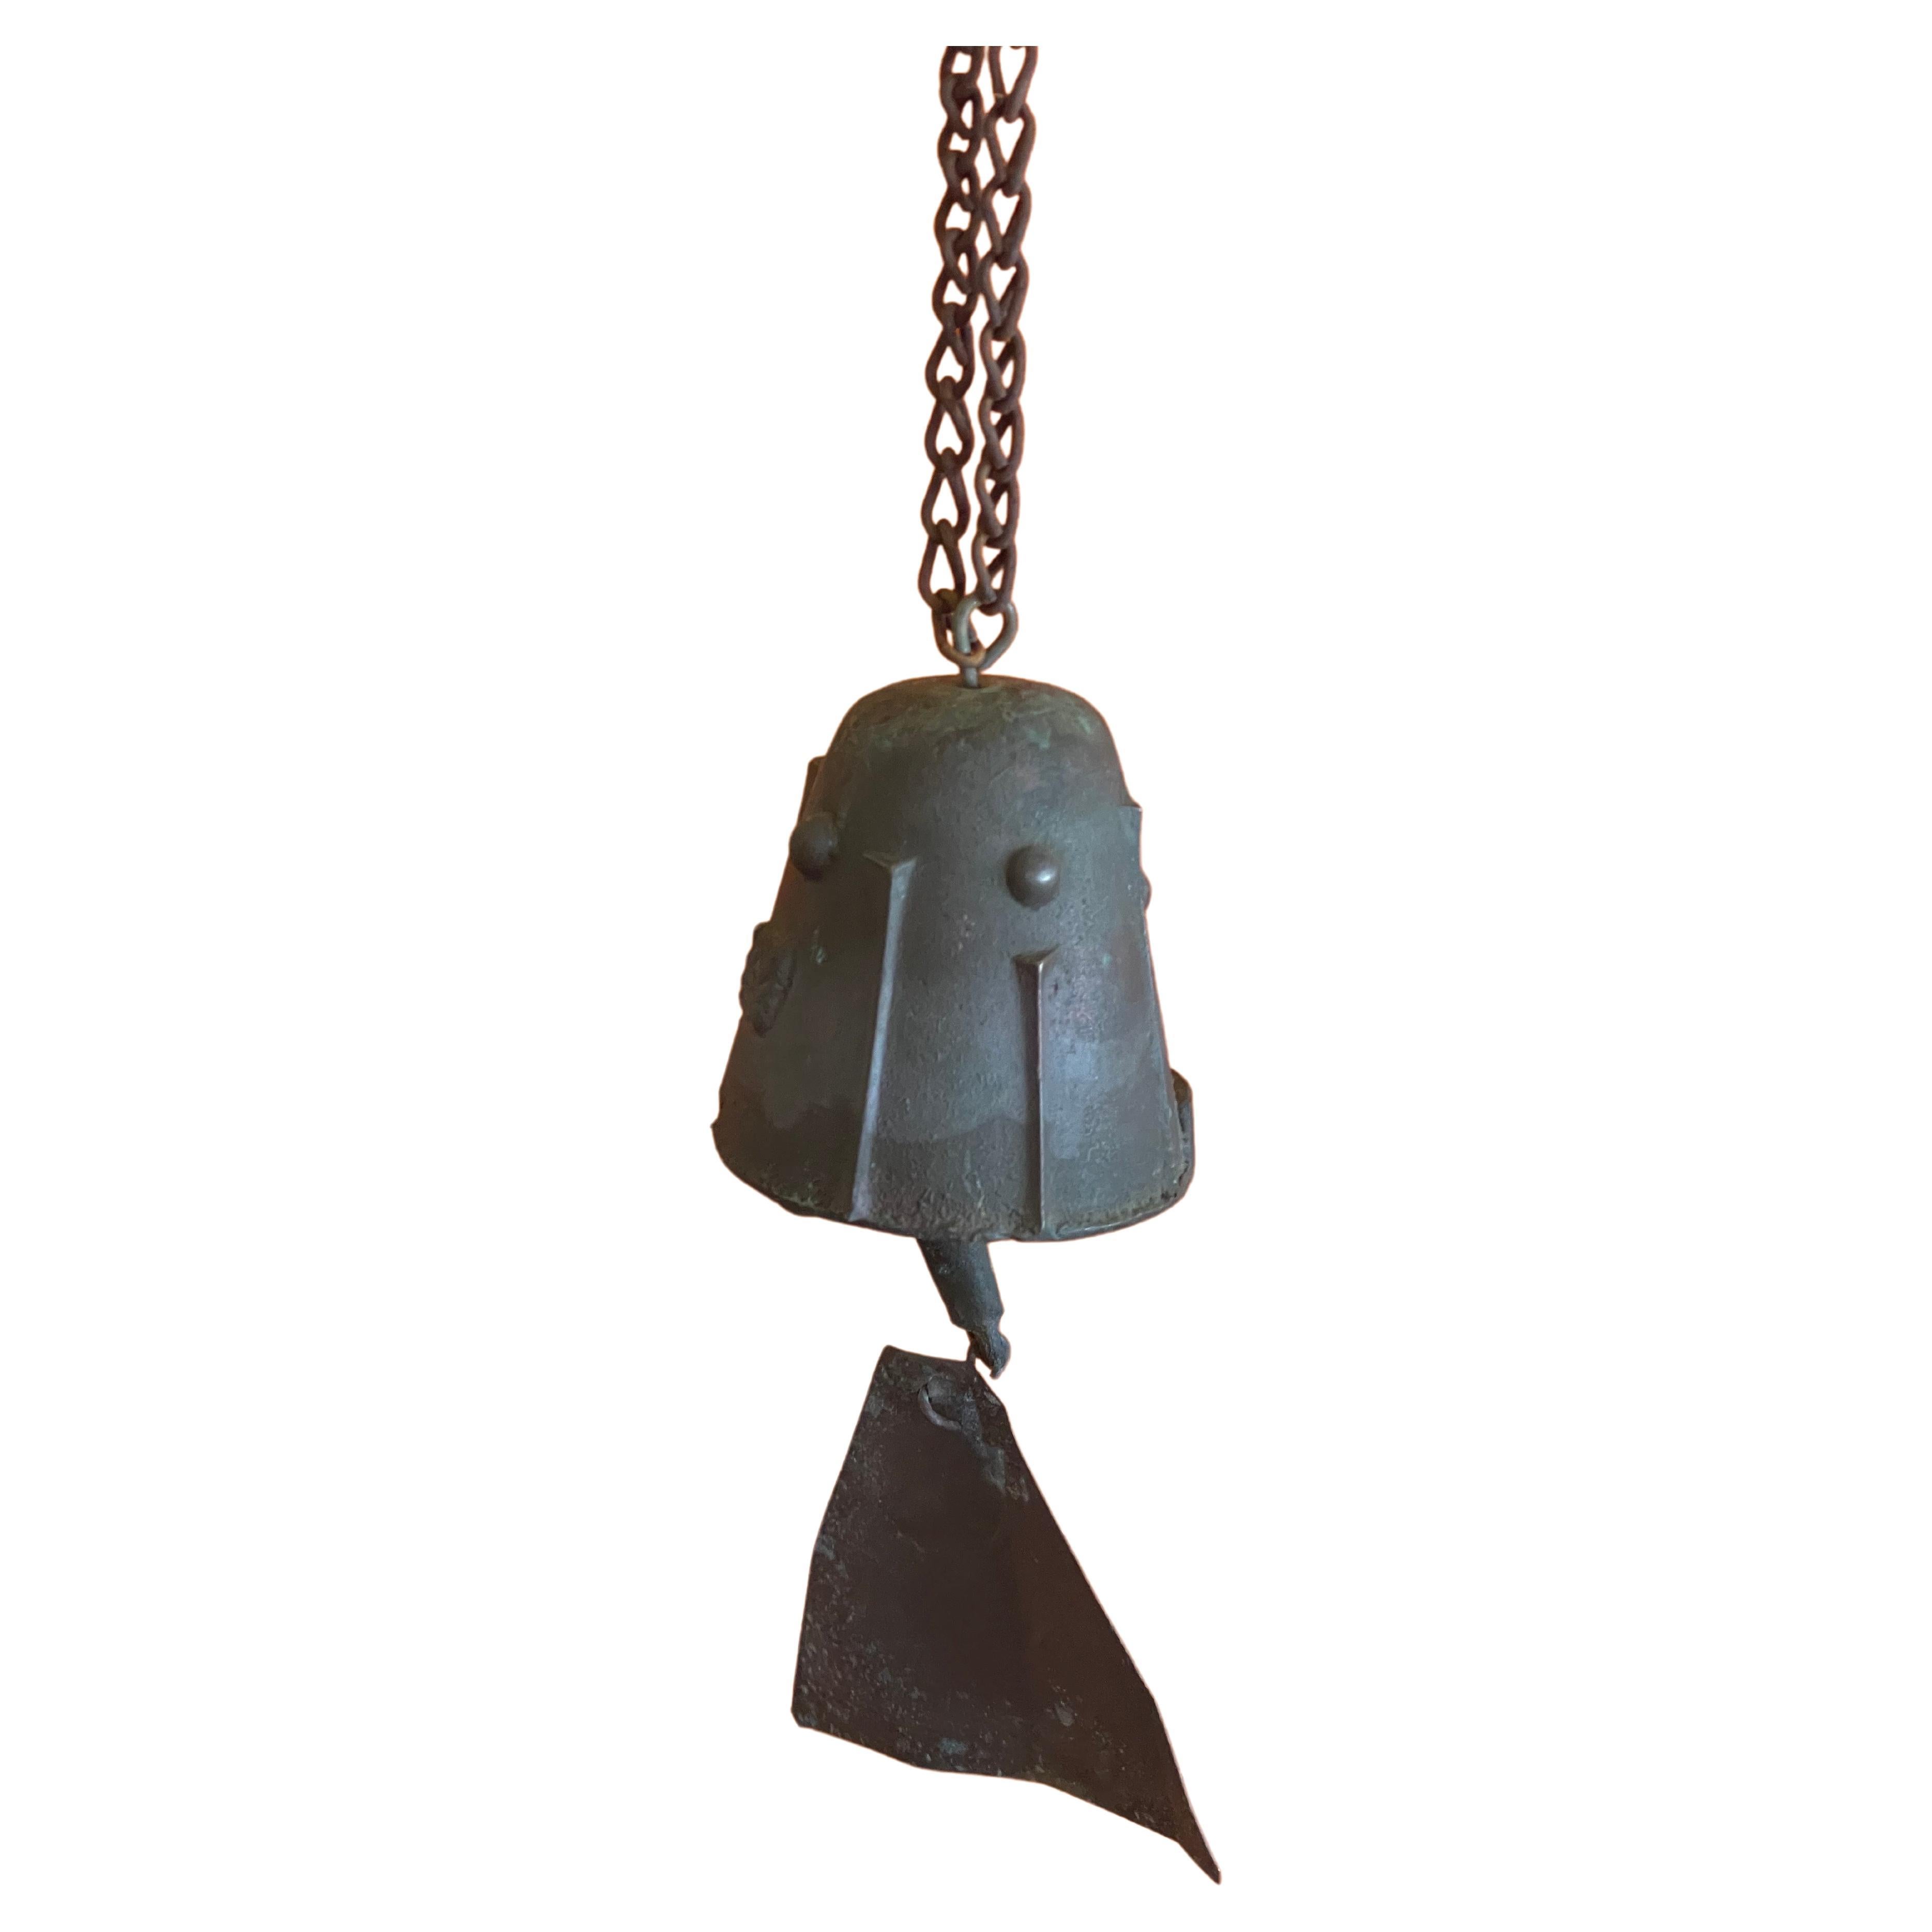 Small bronze wind chime / bell by Paolo Soleri for Cosanti, circa 1970s. The piece is is 21.5